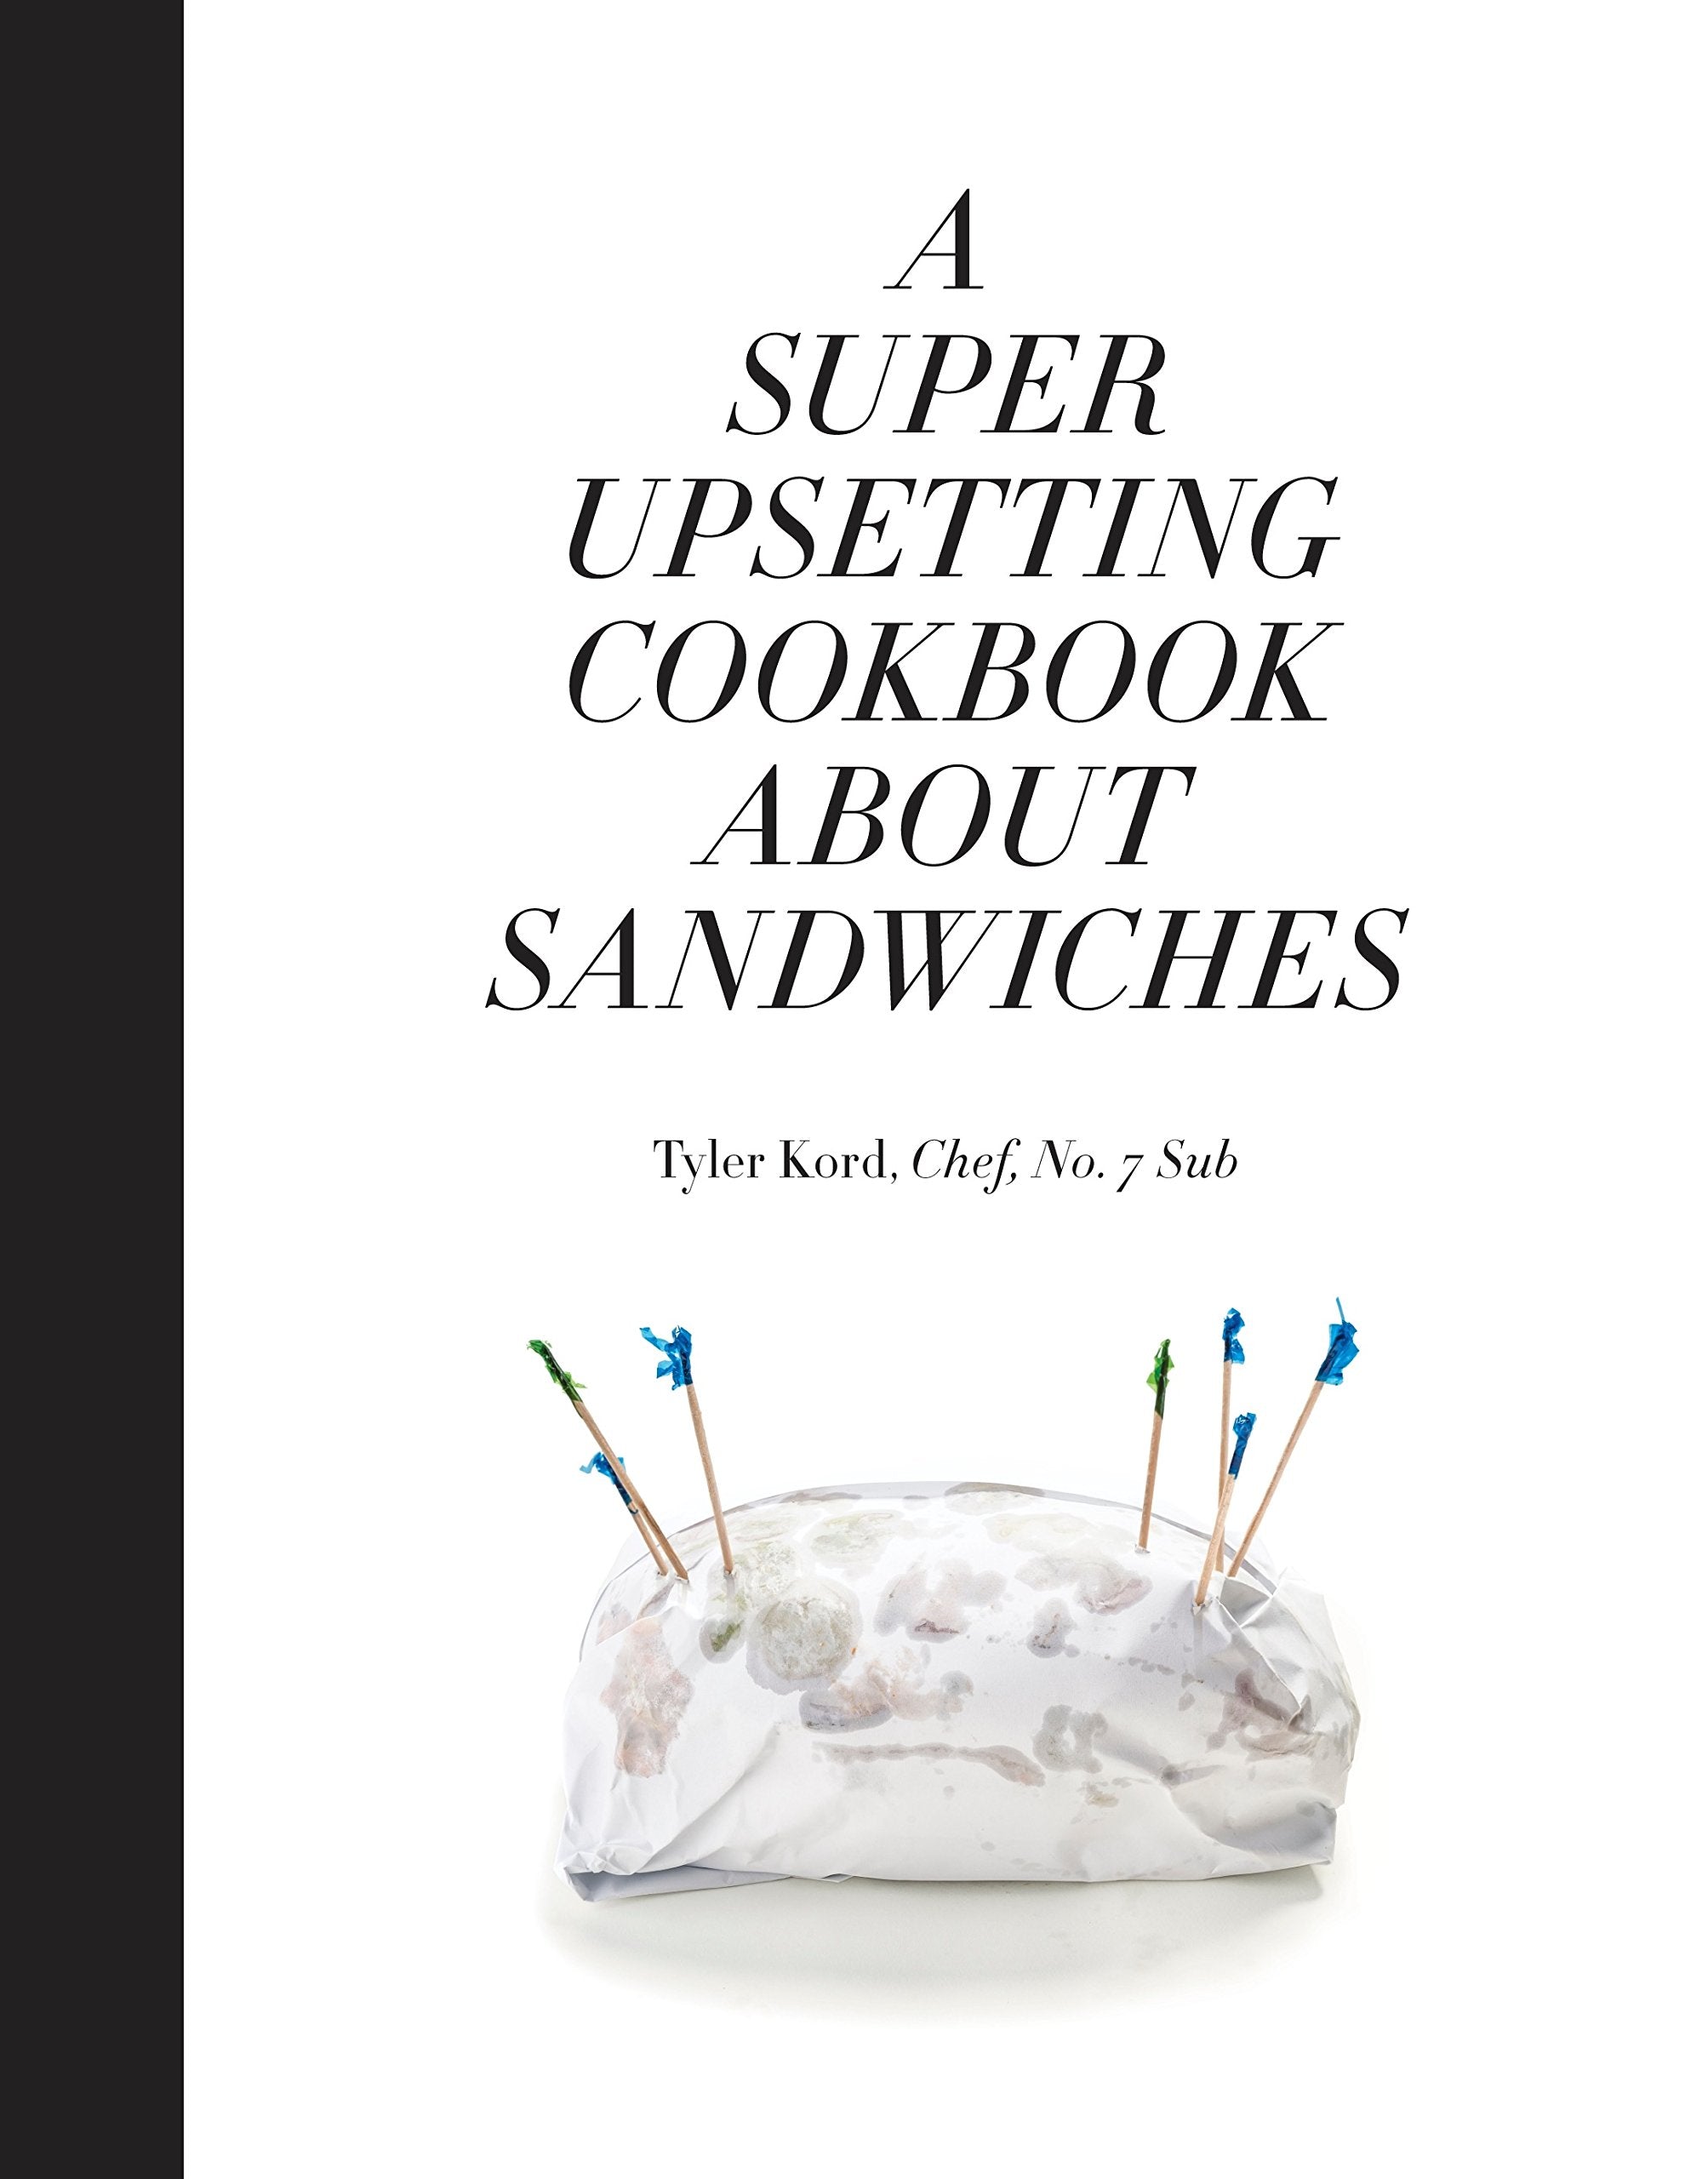 A Super Upsetting Cookbook About Sandwiches (Tyler Ford)